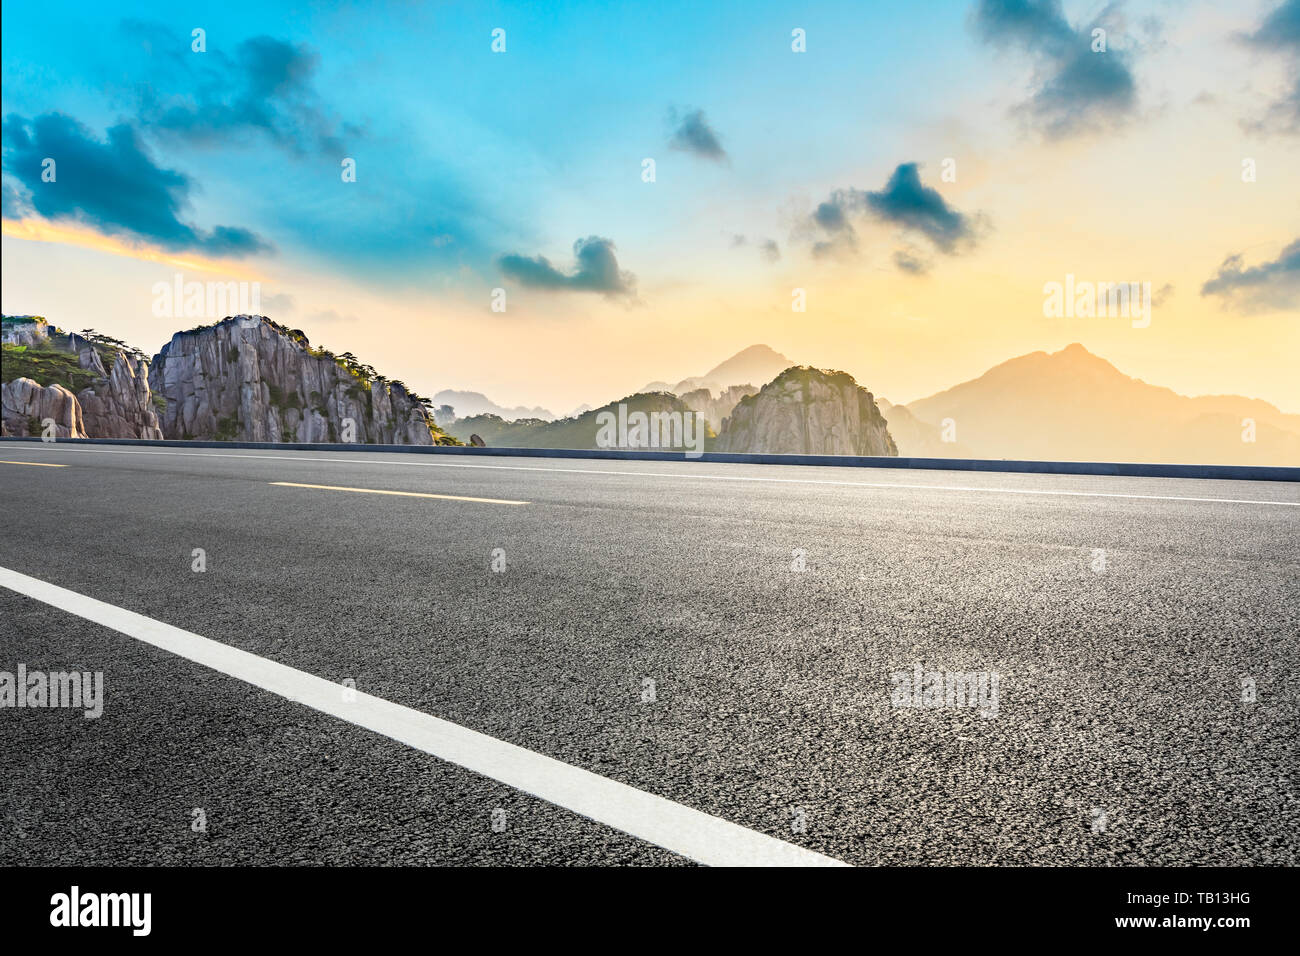 Asphalt highway road and beautiful huangshan mountains nature landscape at sunrise Stock Photo